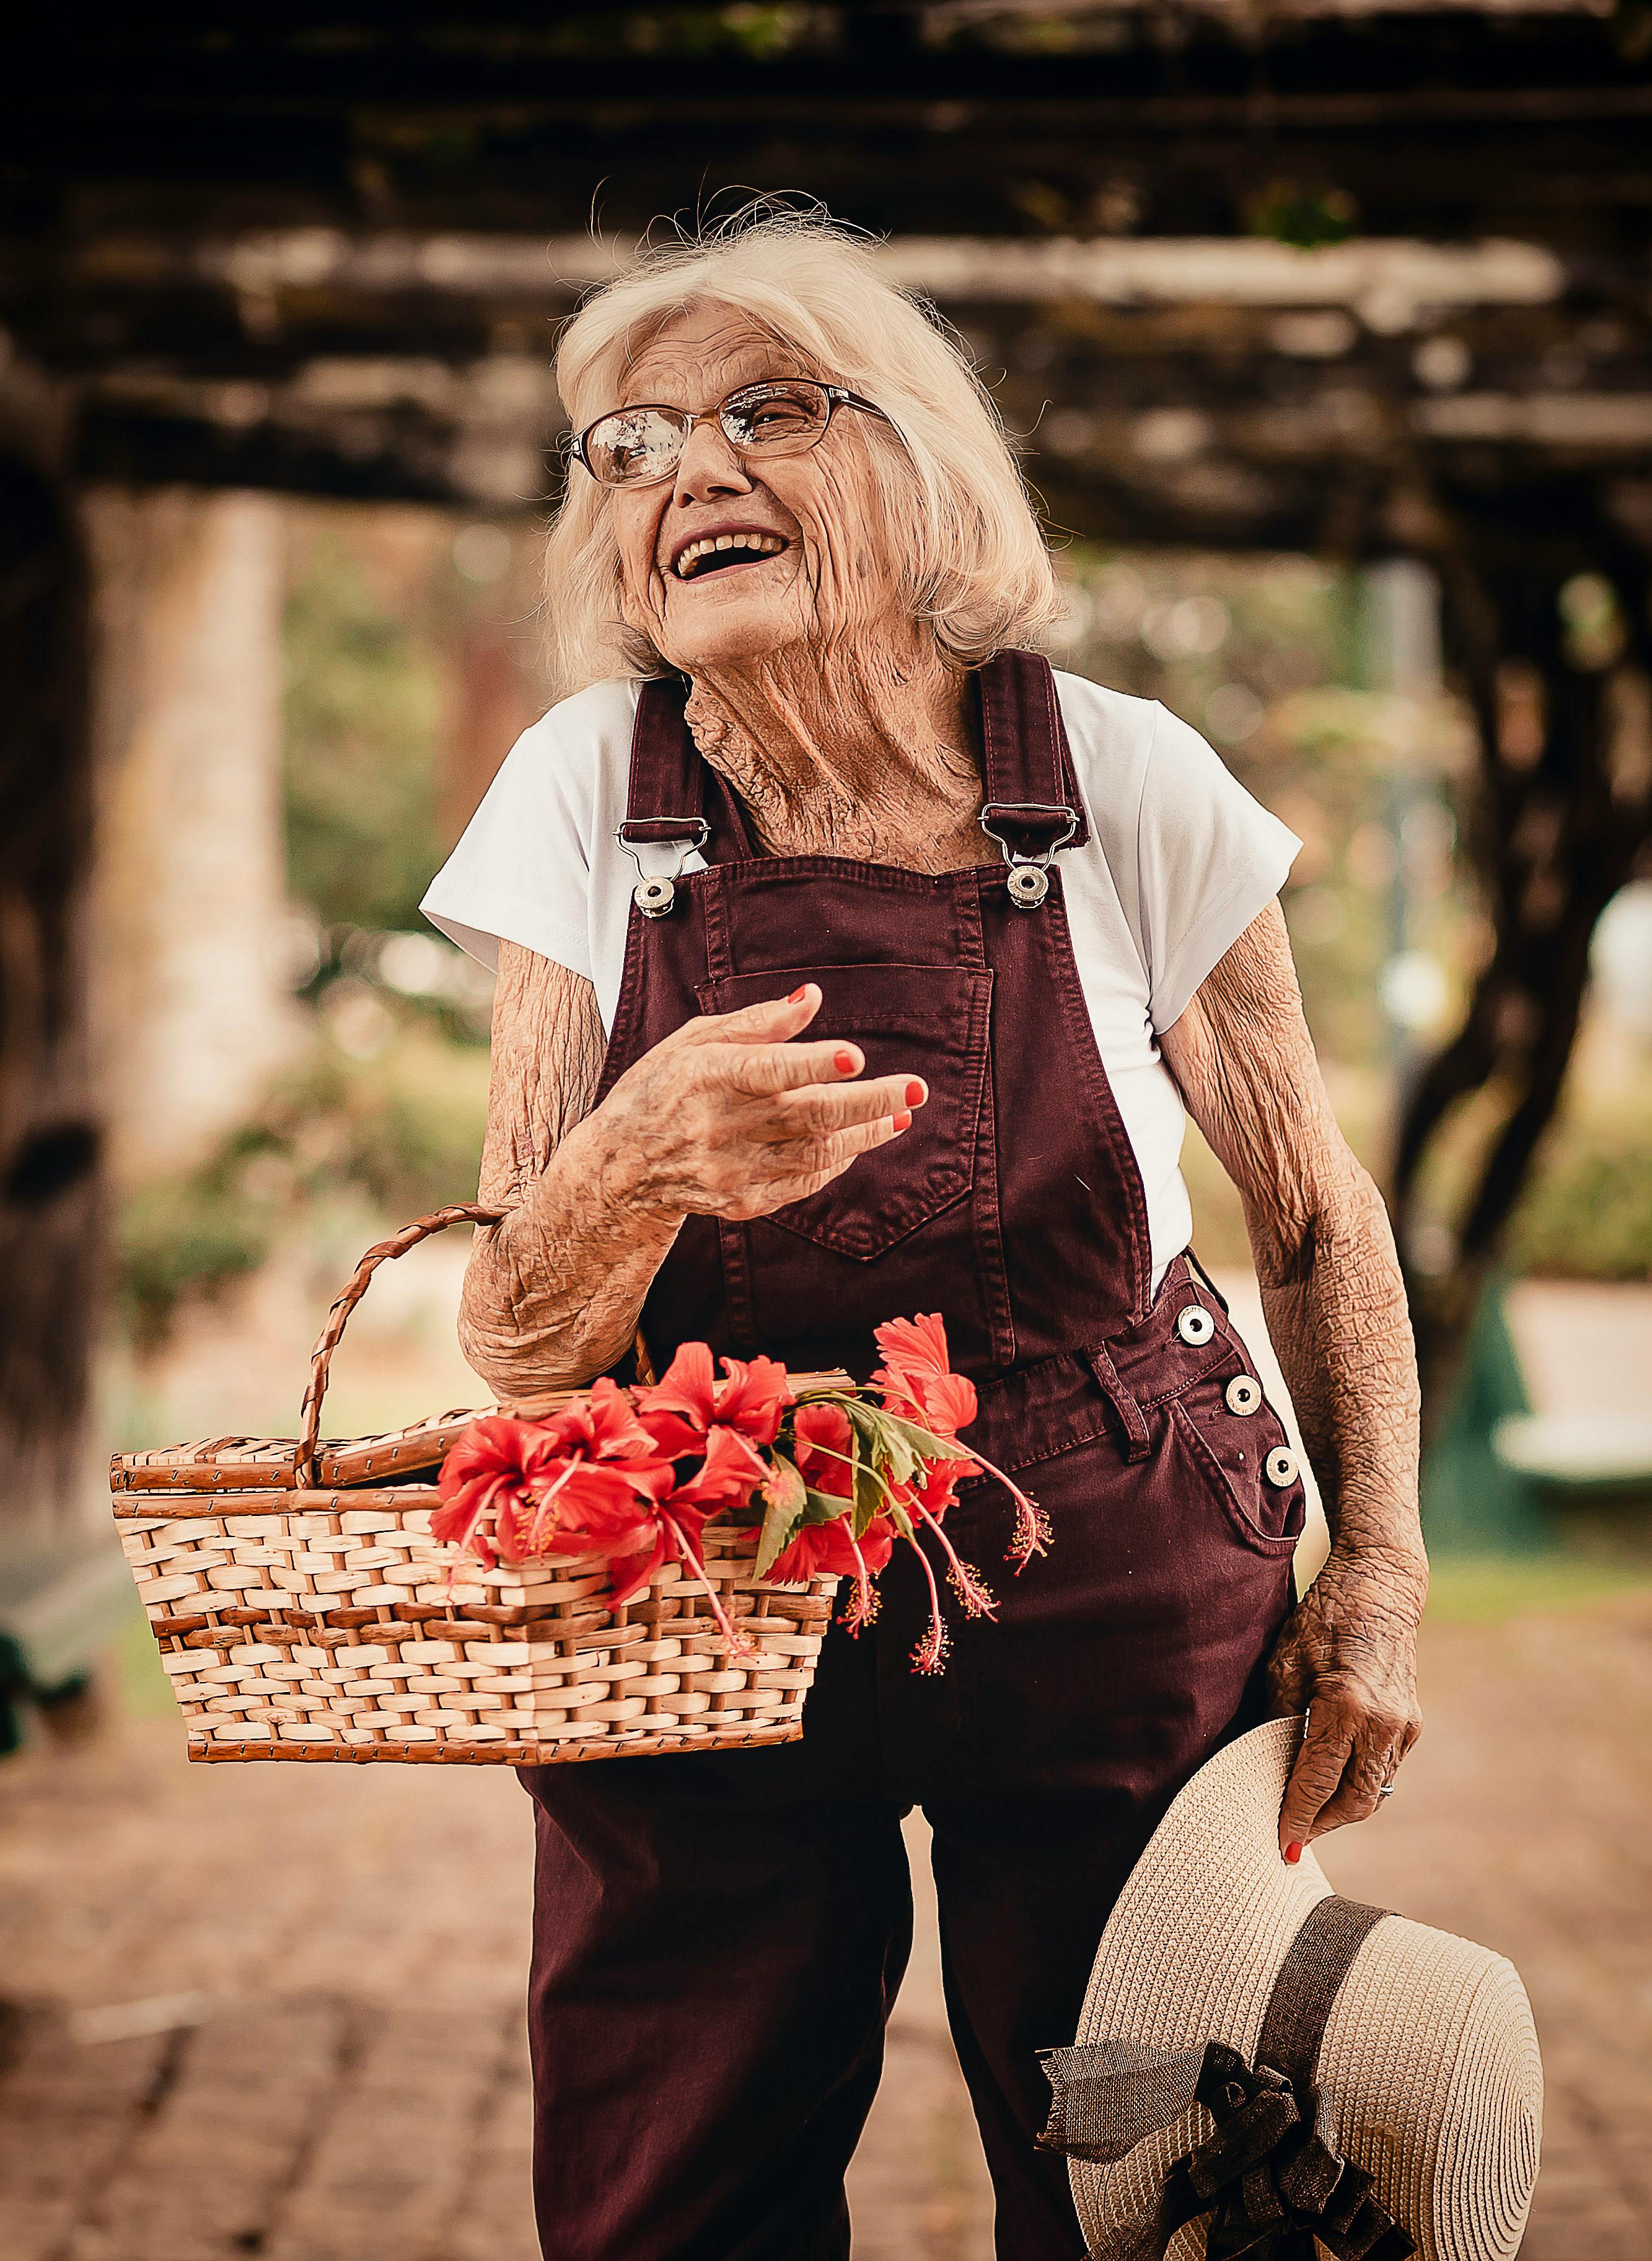 Old woman holding sunhat and picnic basket | Photo: Pexels